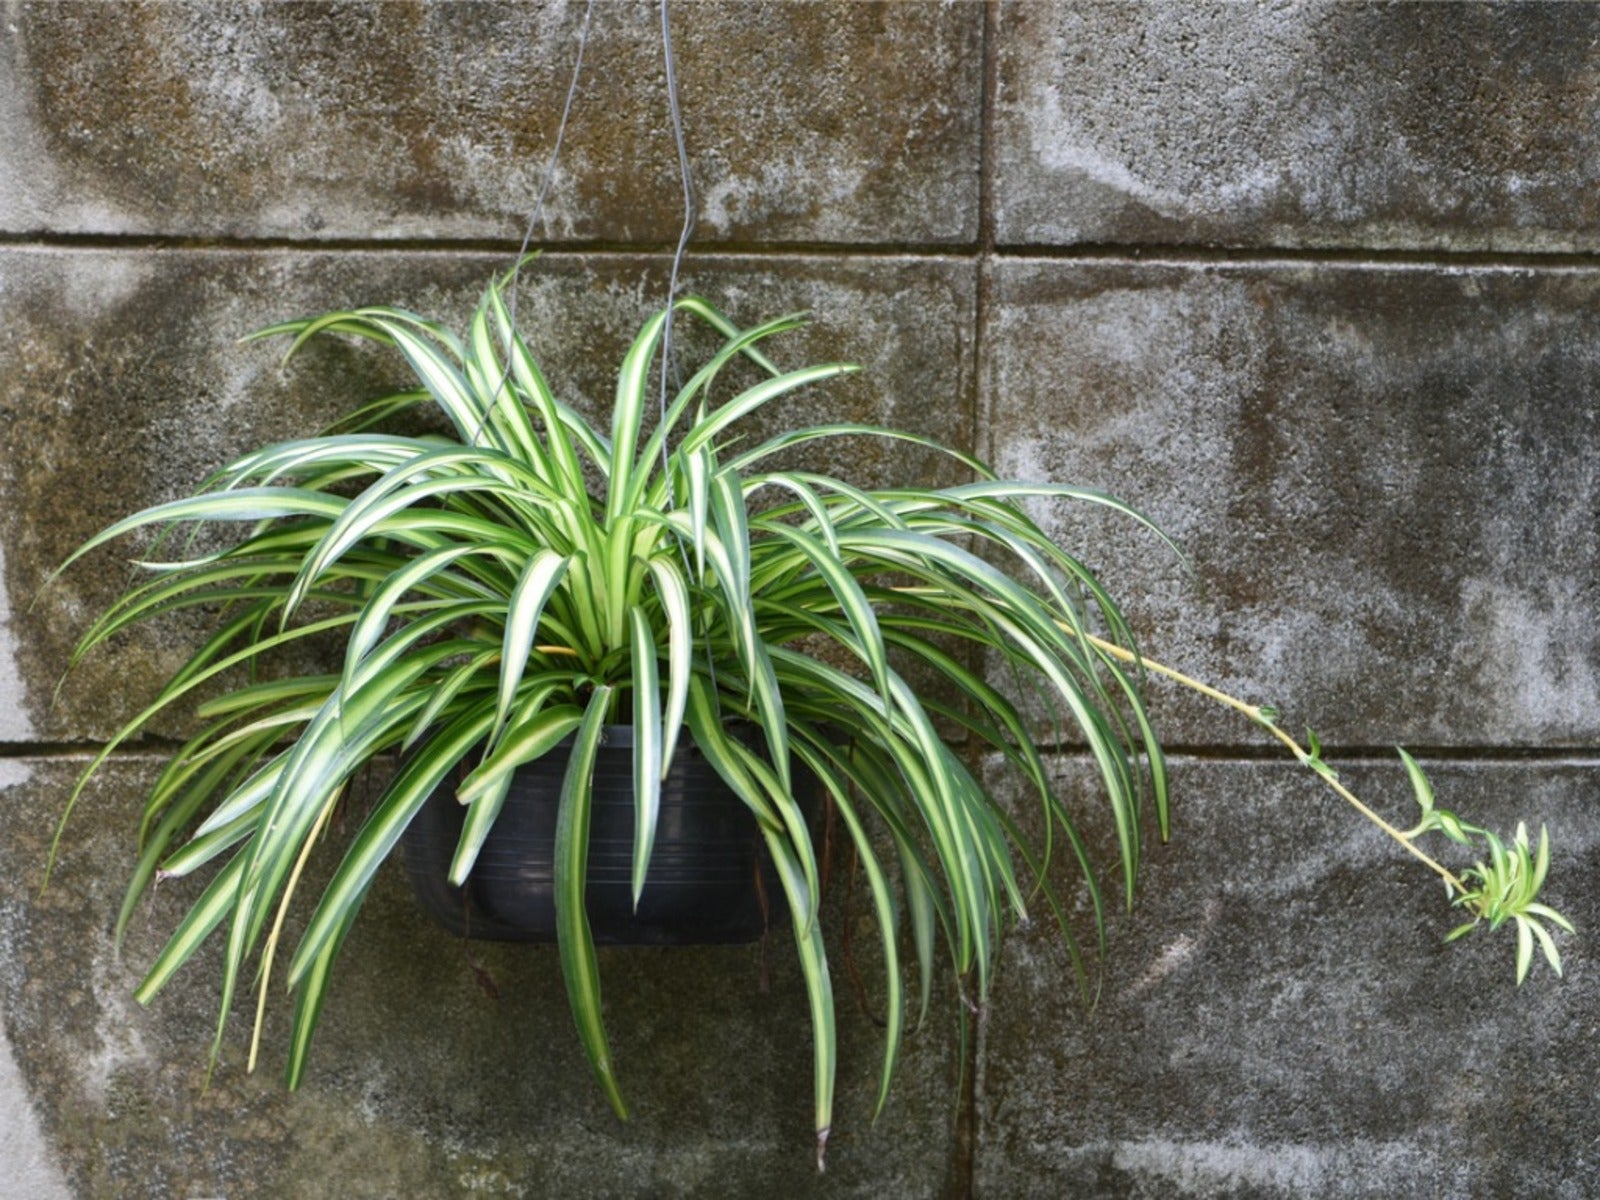 How to care for spider plants